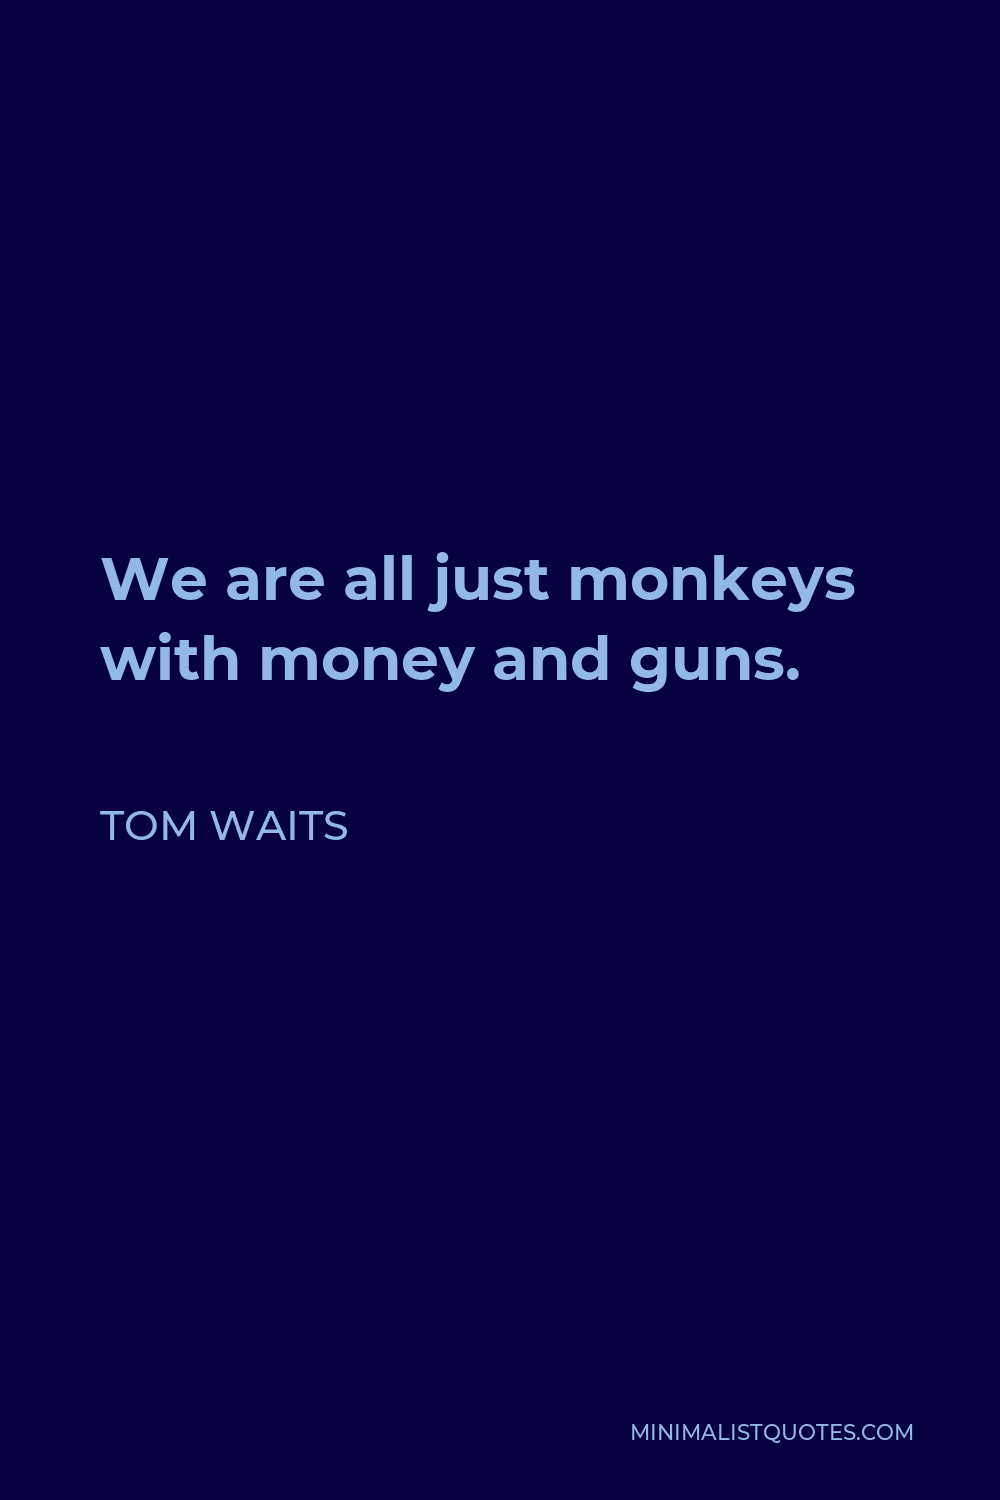 Tom Waits Quote - We are all just monkeys with money and guns.